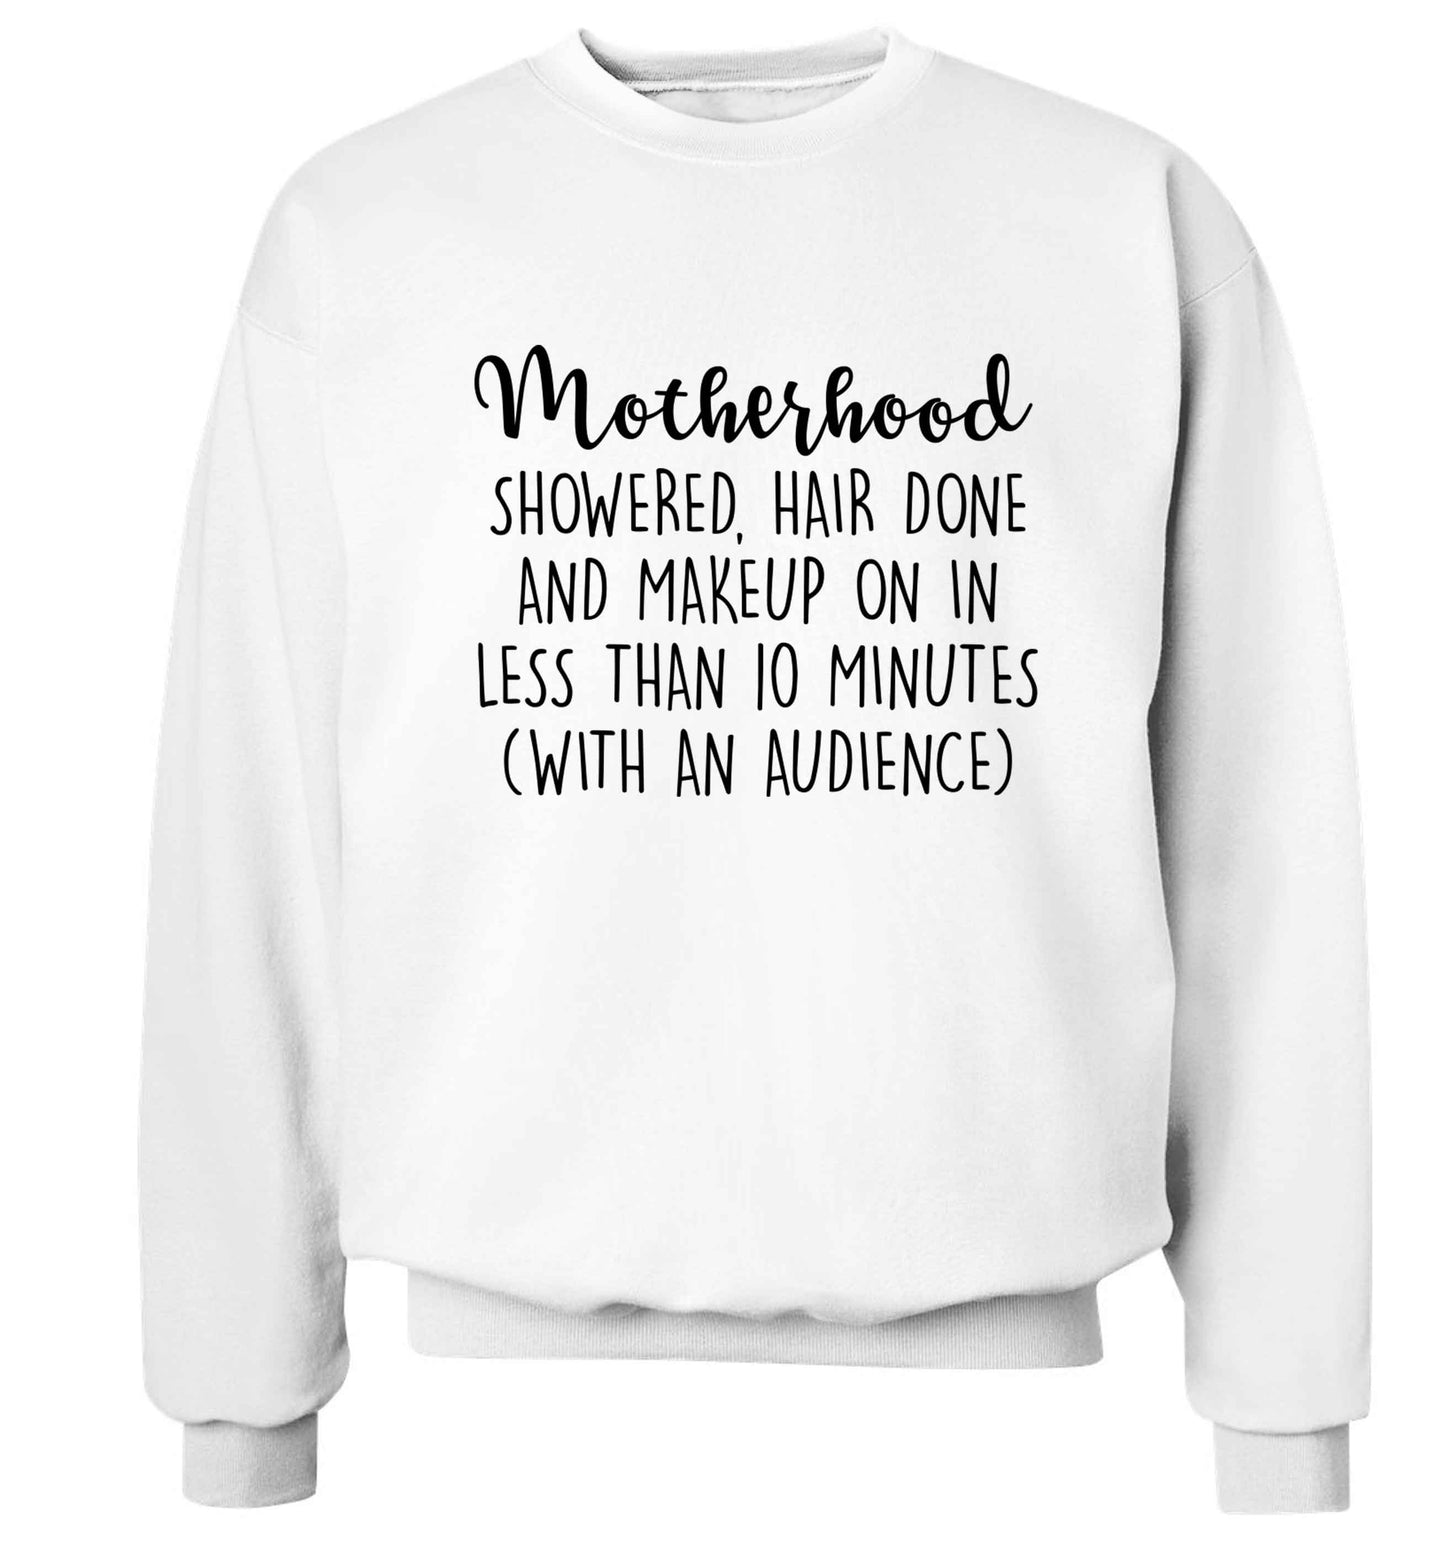 Motherhood, showered, hair done and makeup on Adult's unisex white Sweater 2XL